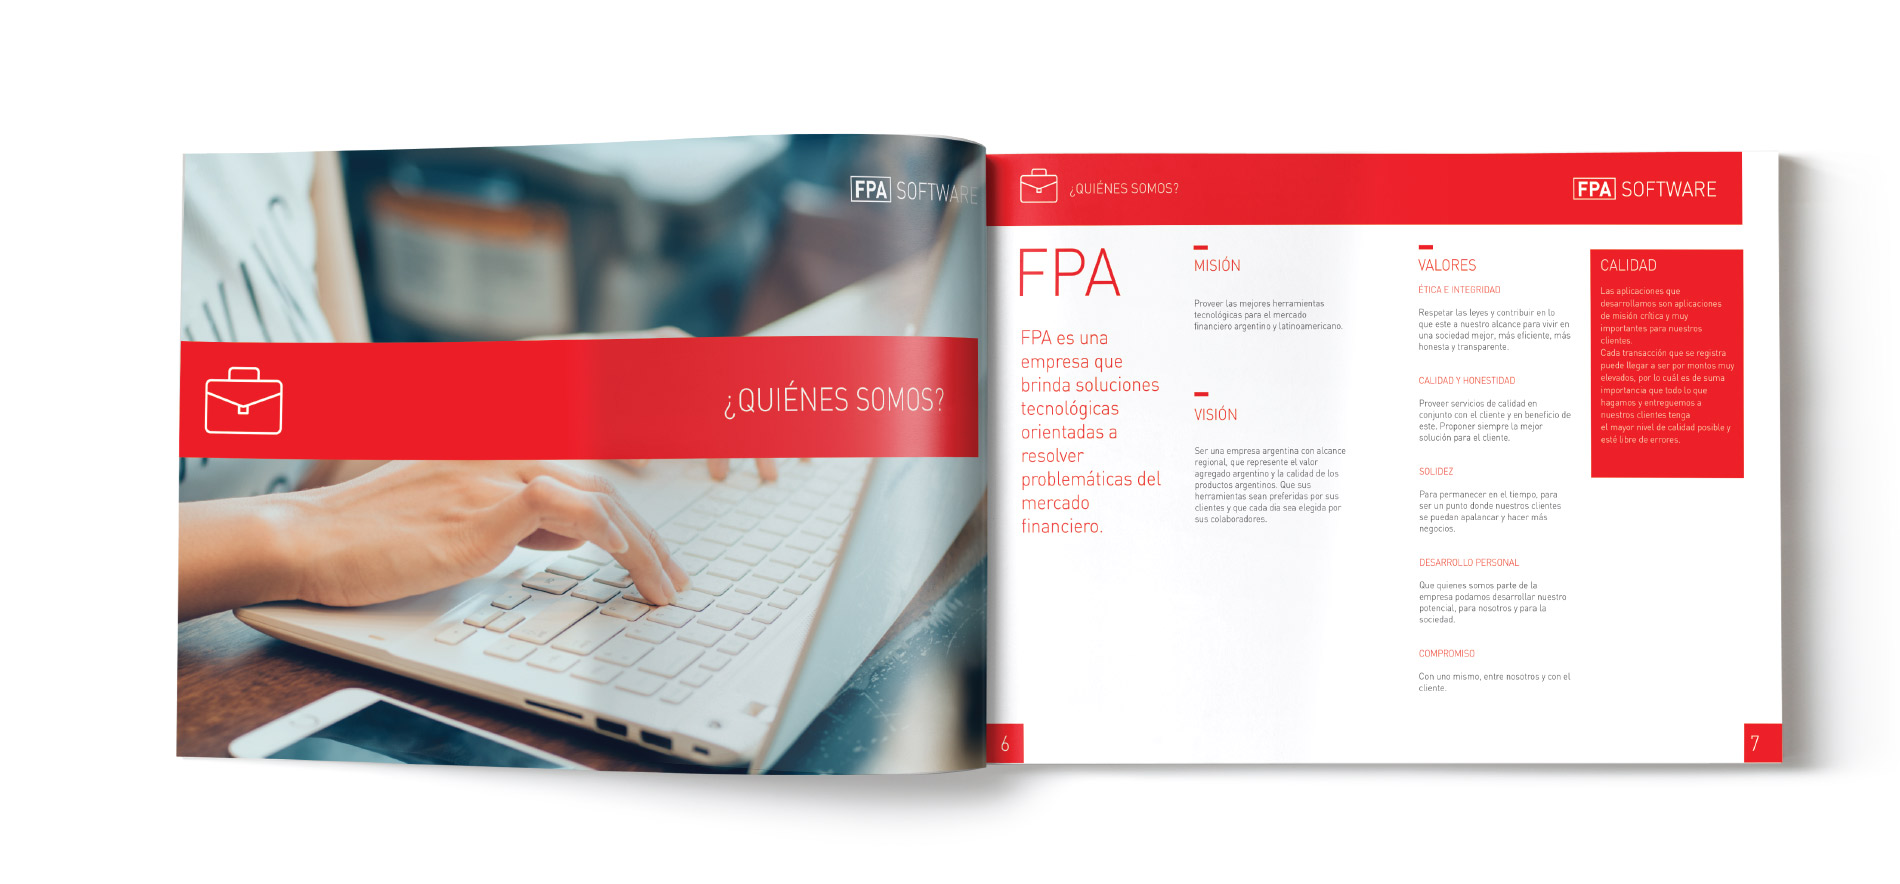 FPA Software